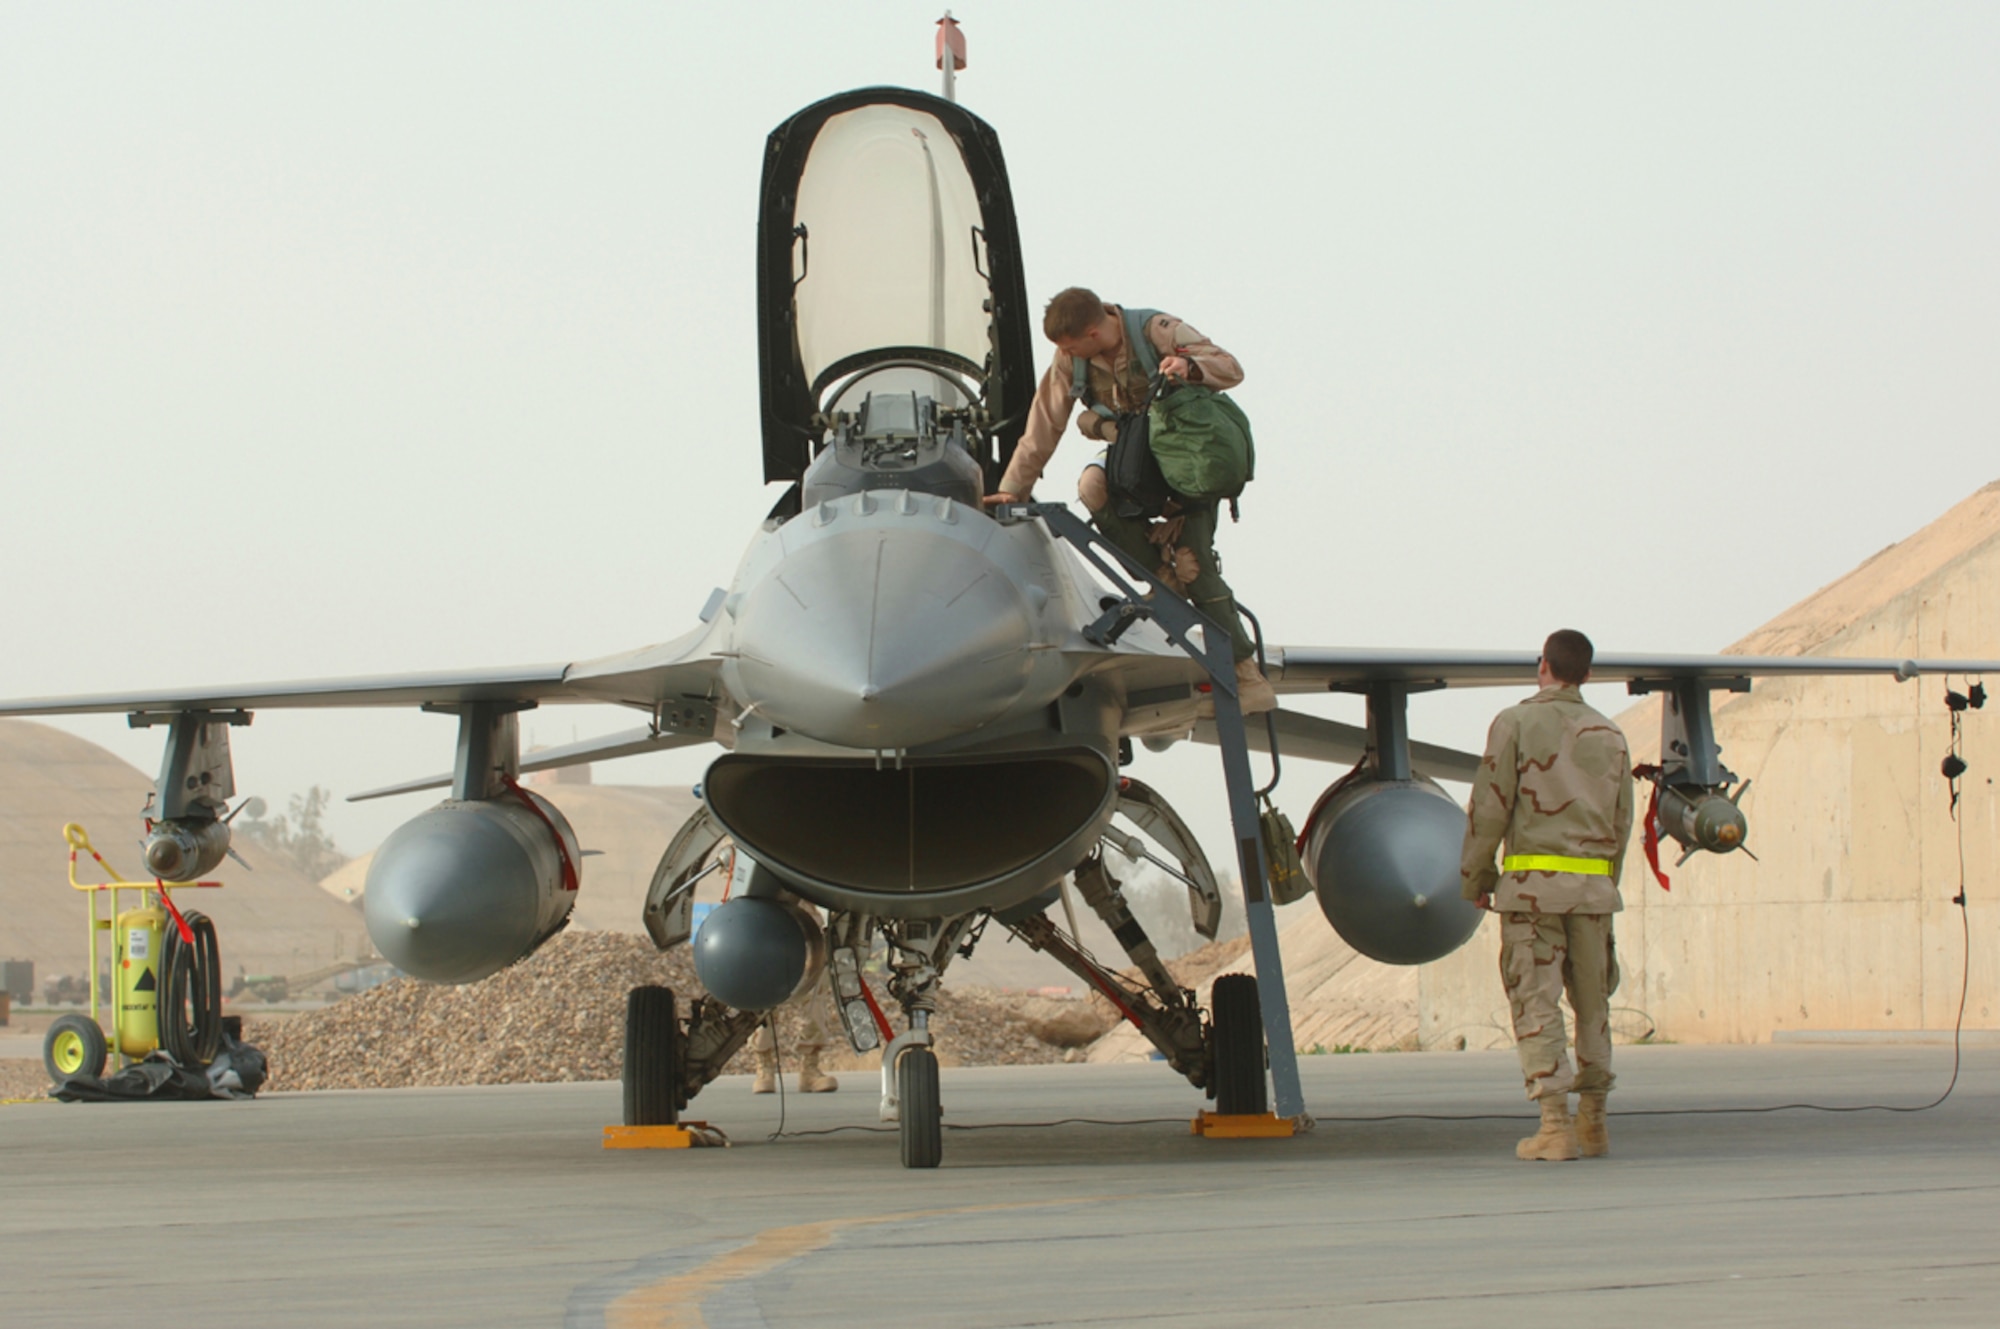 01/29/2007 -- BALAD AIR BASE, Iraq -- Capt. William "Shogun" Lutmer, deployed to the 332nd Air Expeditionary Wing here as part of the 14th Expeditionary Fighter Squadron climbs into his Block 50 F-16 while his Crew Chief Senior Airman Skylar Mims, 14th Expeditionary Aircraft Maintenance Squadron, prepares to assist him before departing on a combat mission over Iraq Jan. 29.  The 14th Fighter Squadron is deployed from Misawa Air Base, Japan, and is the first Block 50 F-16 squadron deployed to Iraq (U. S. Air Force photo by Staff Sgt. Michael R. Holzworth) 

